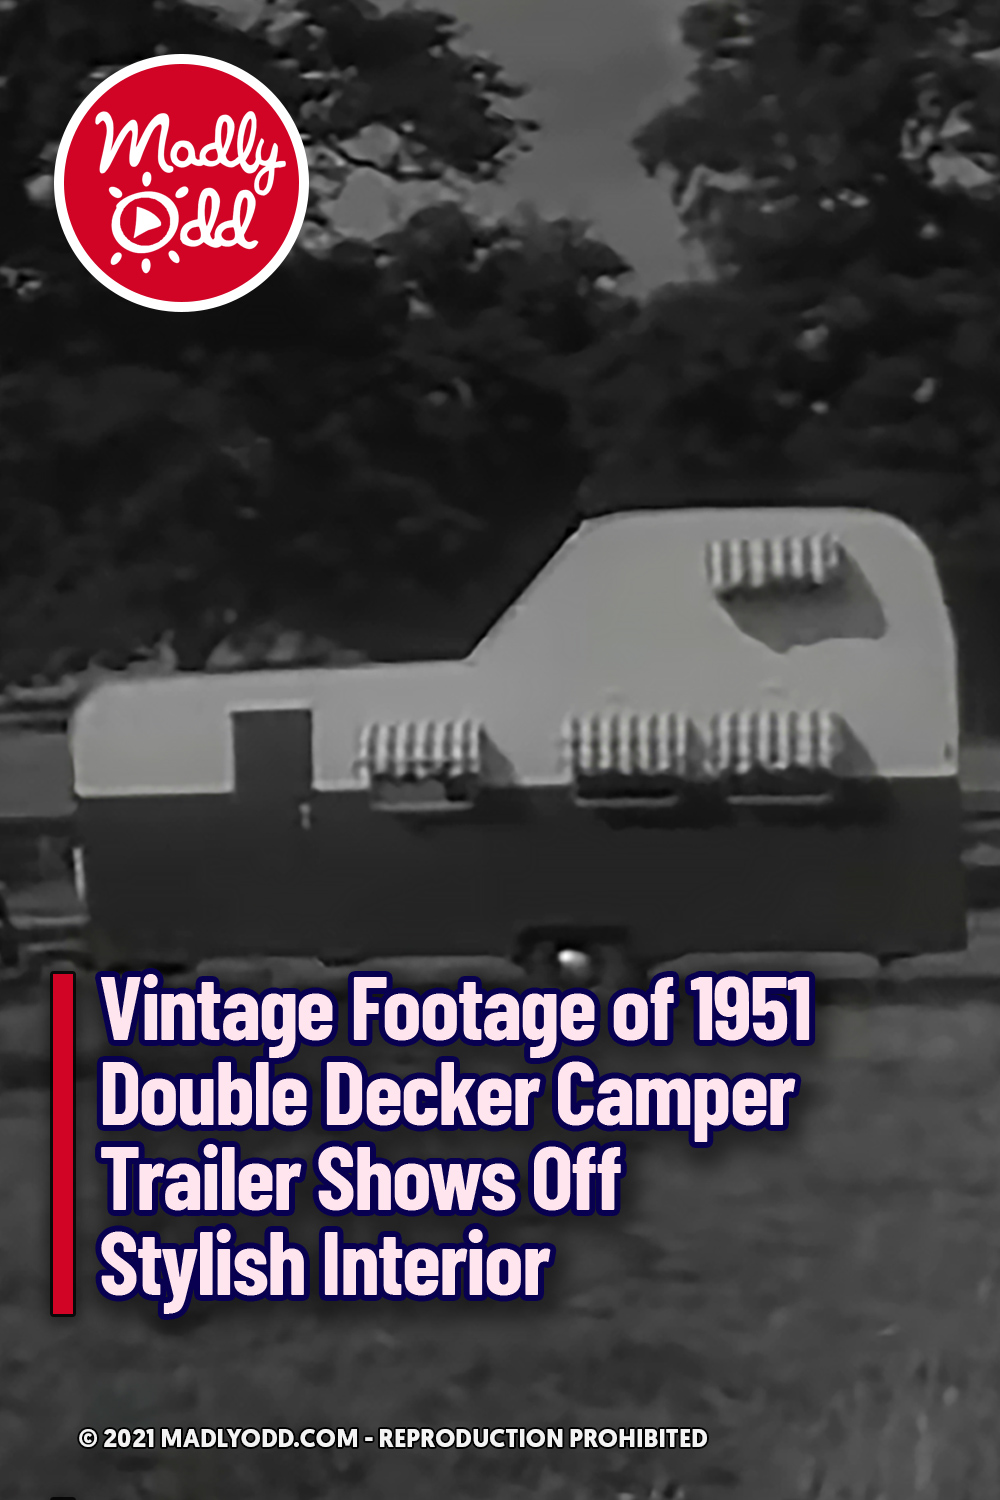 Vintage Footage of 1951 Double Decker Camper Trailer Shows Off Stylish Interior